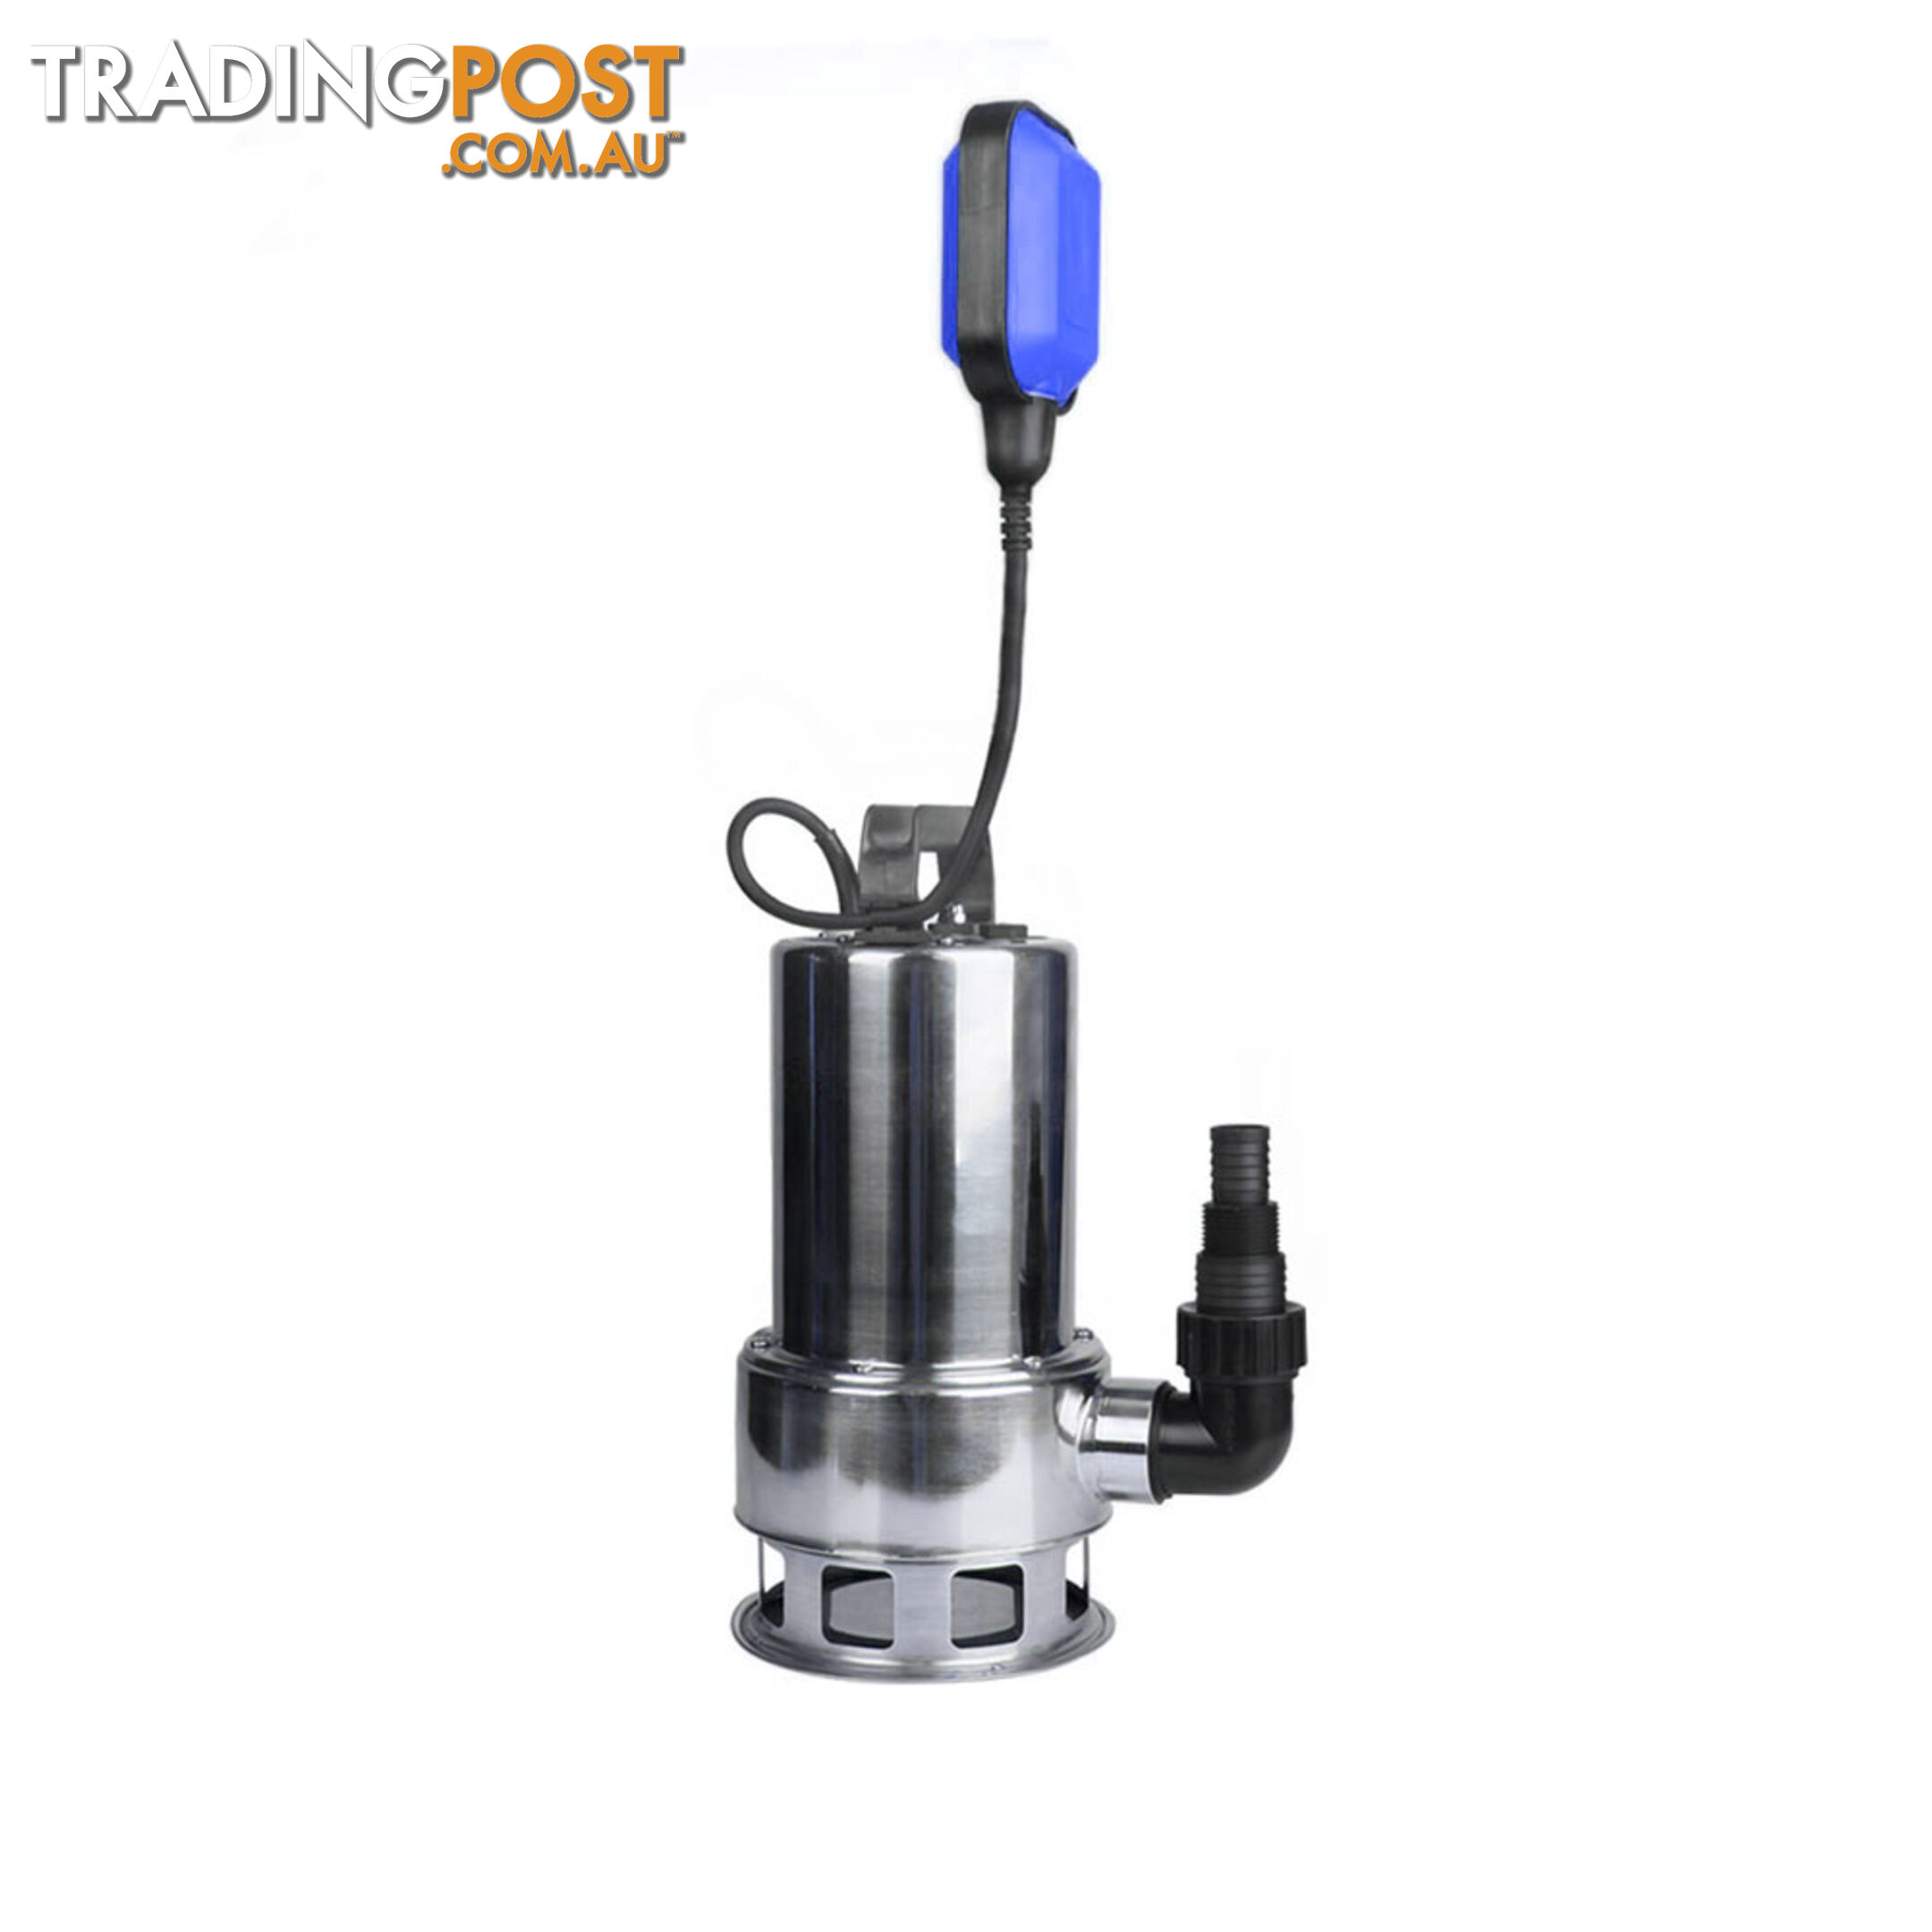 1500W Submersible Water Pump Universal Fitting